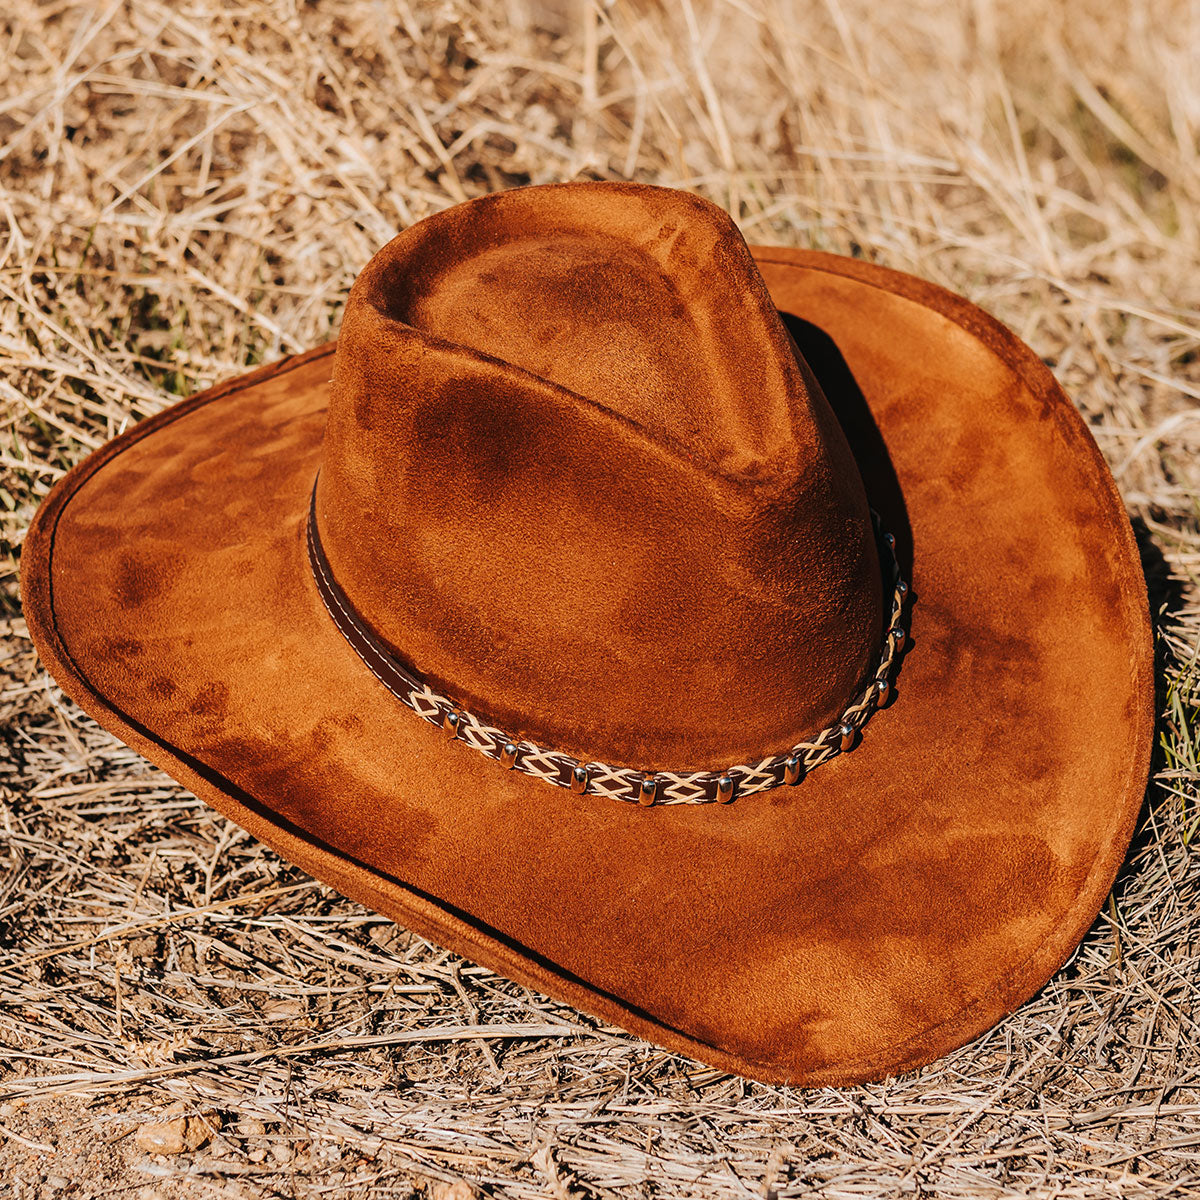 FREEBIRD Jones rust western cowboy hat featuring teardrop crown, upturned-brim, and braided leather band detailed view